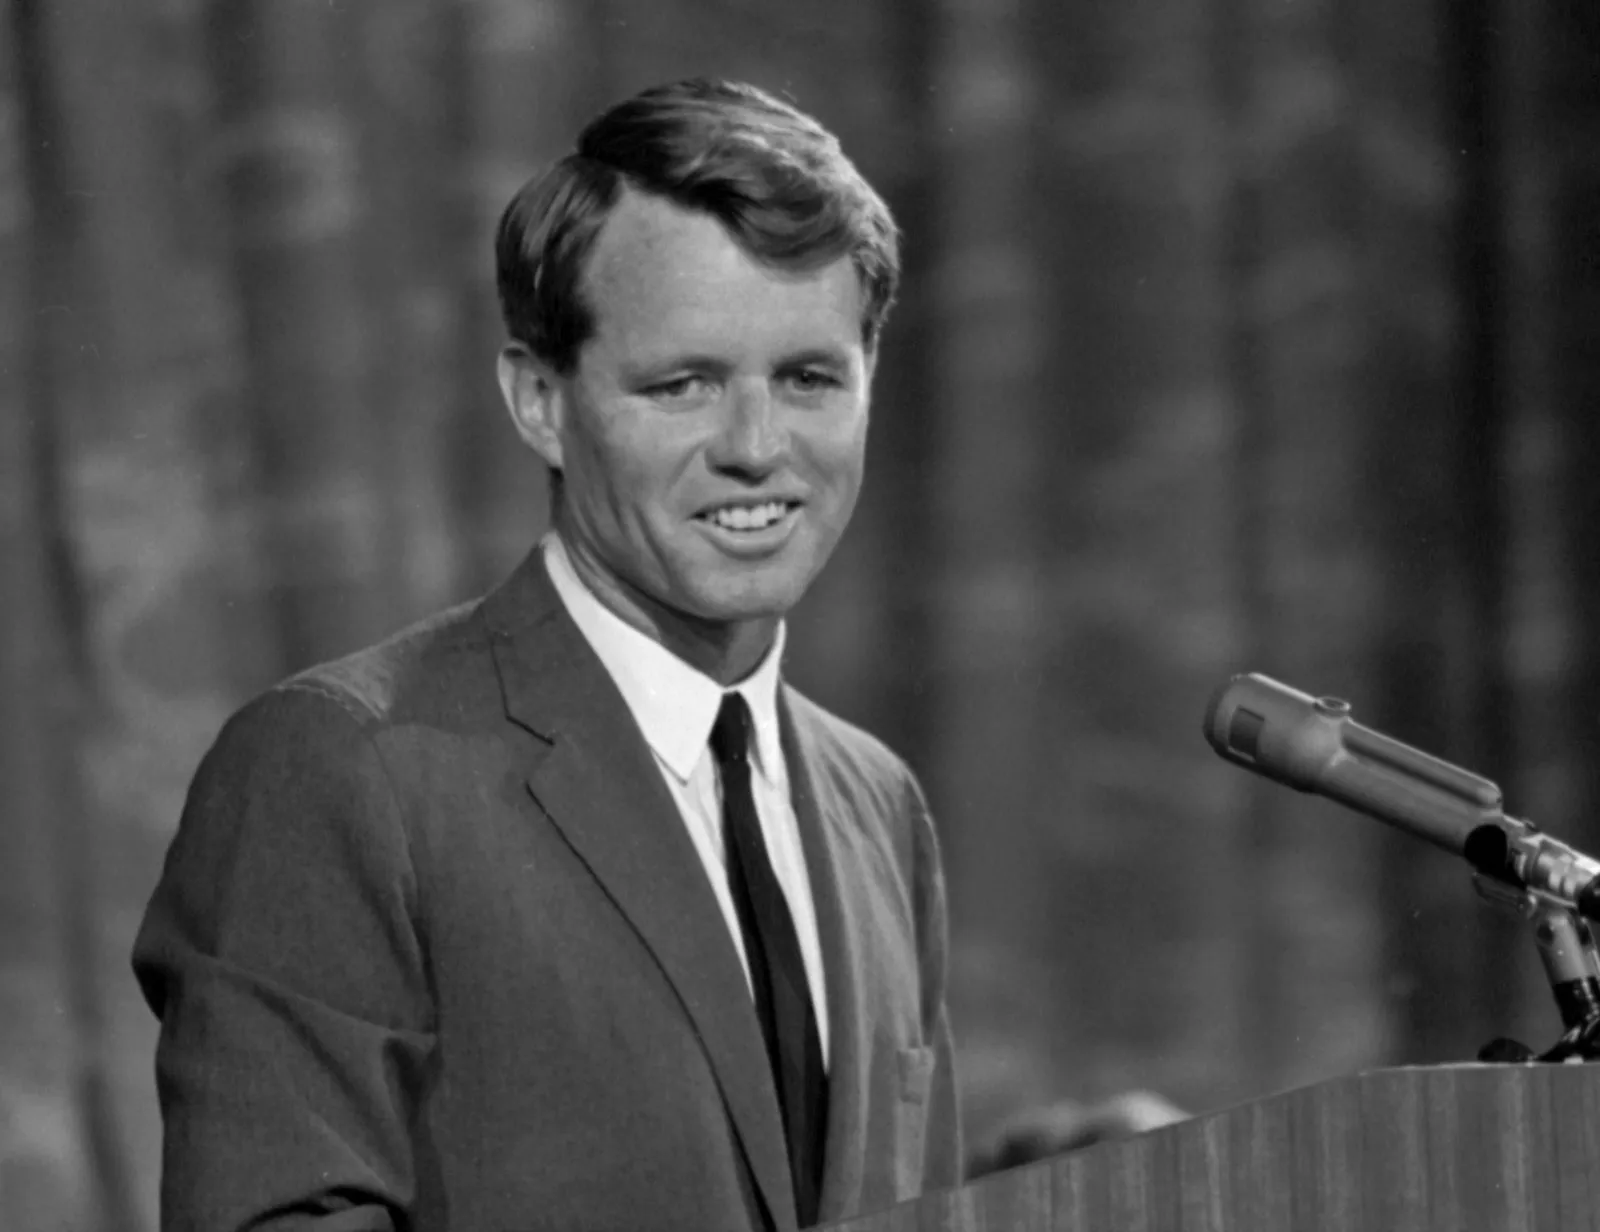 A picture of Robert F. Kennedy delivering a speech. Kennedy was assassinated on 6 June 1968 while campaigning for the US presidency.